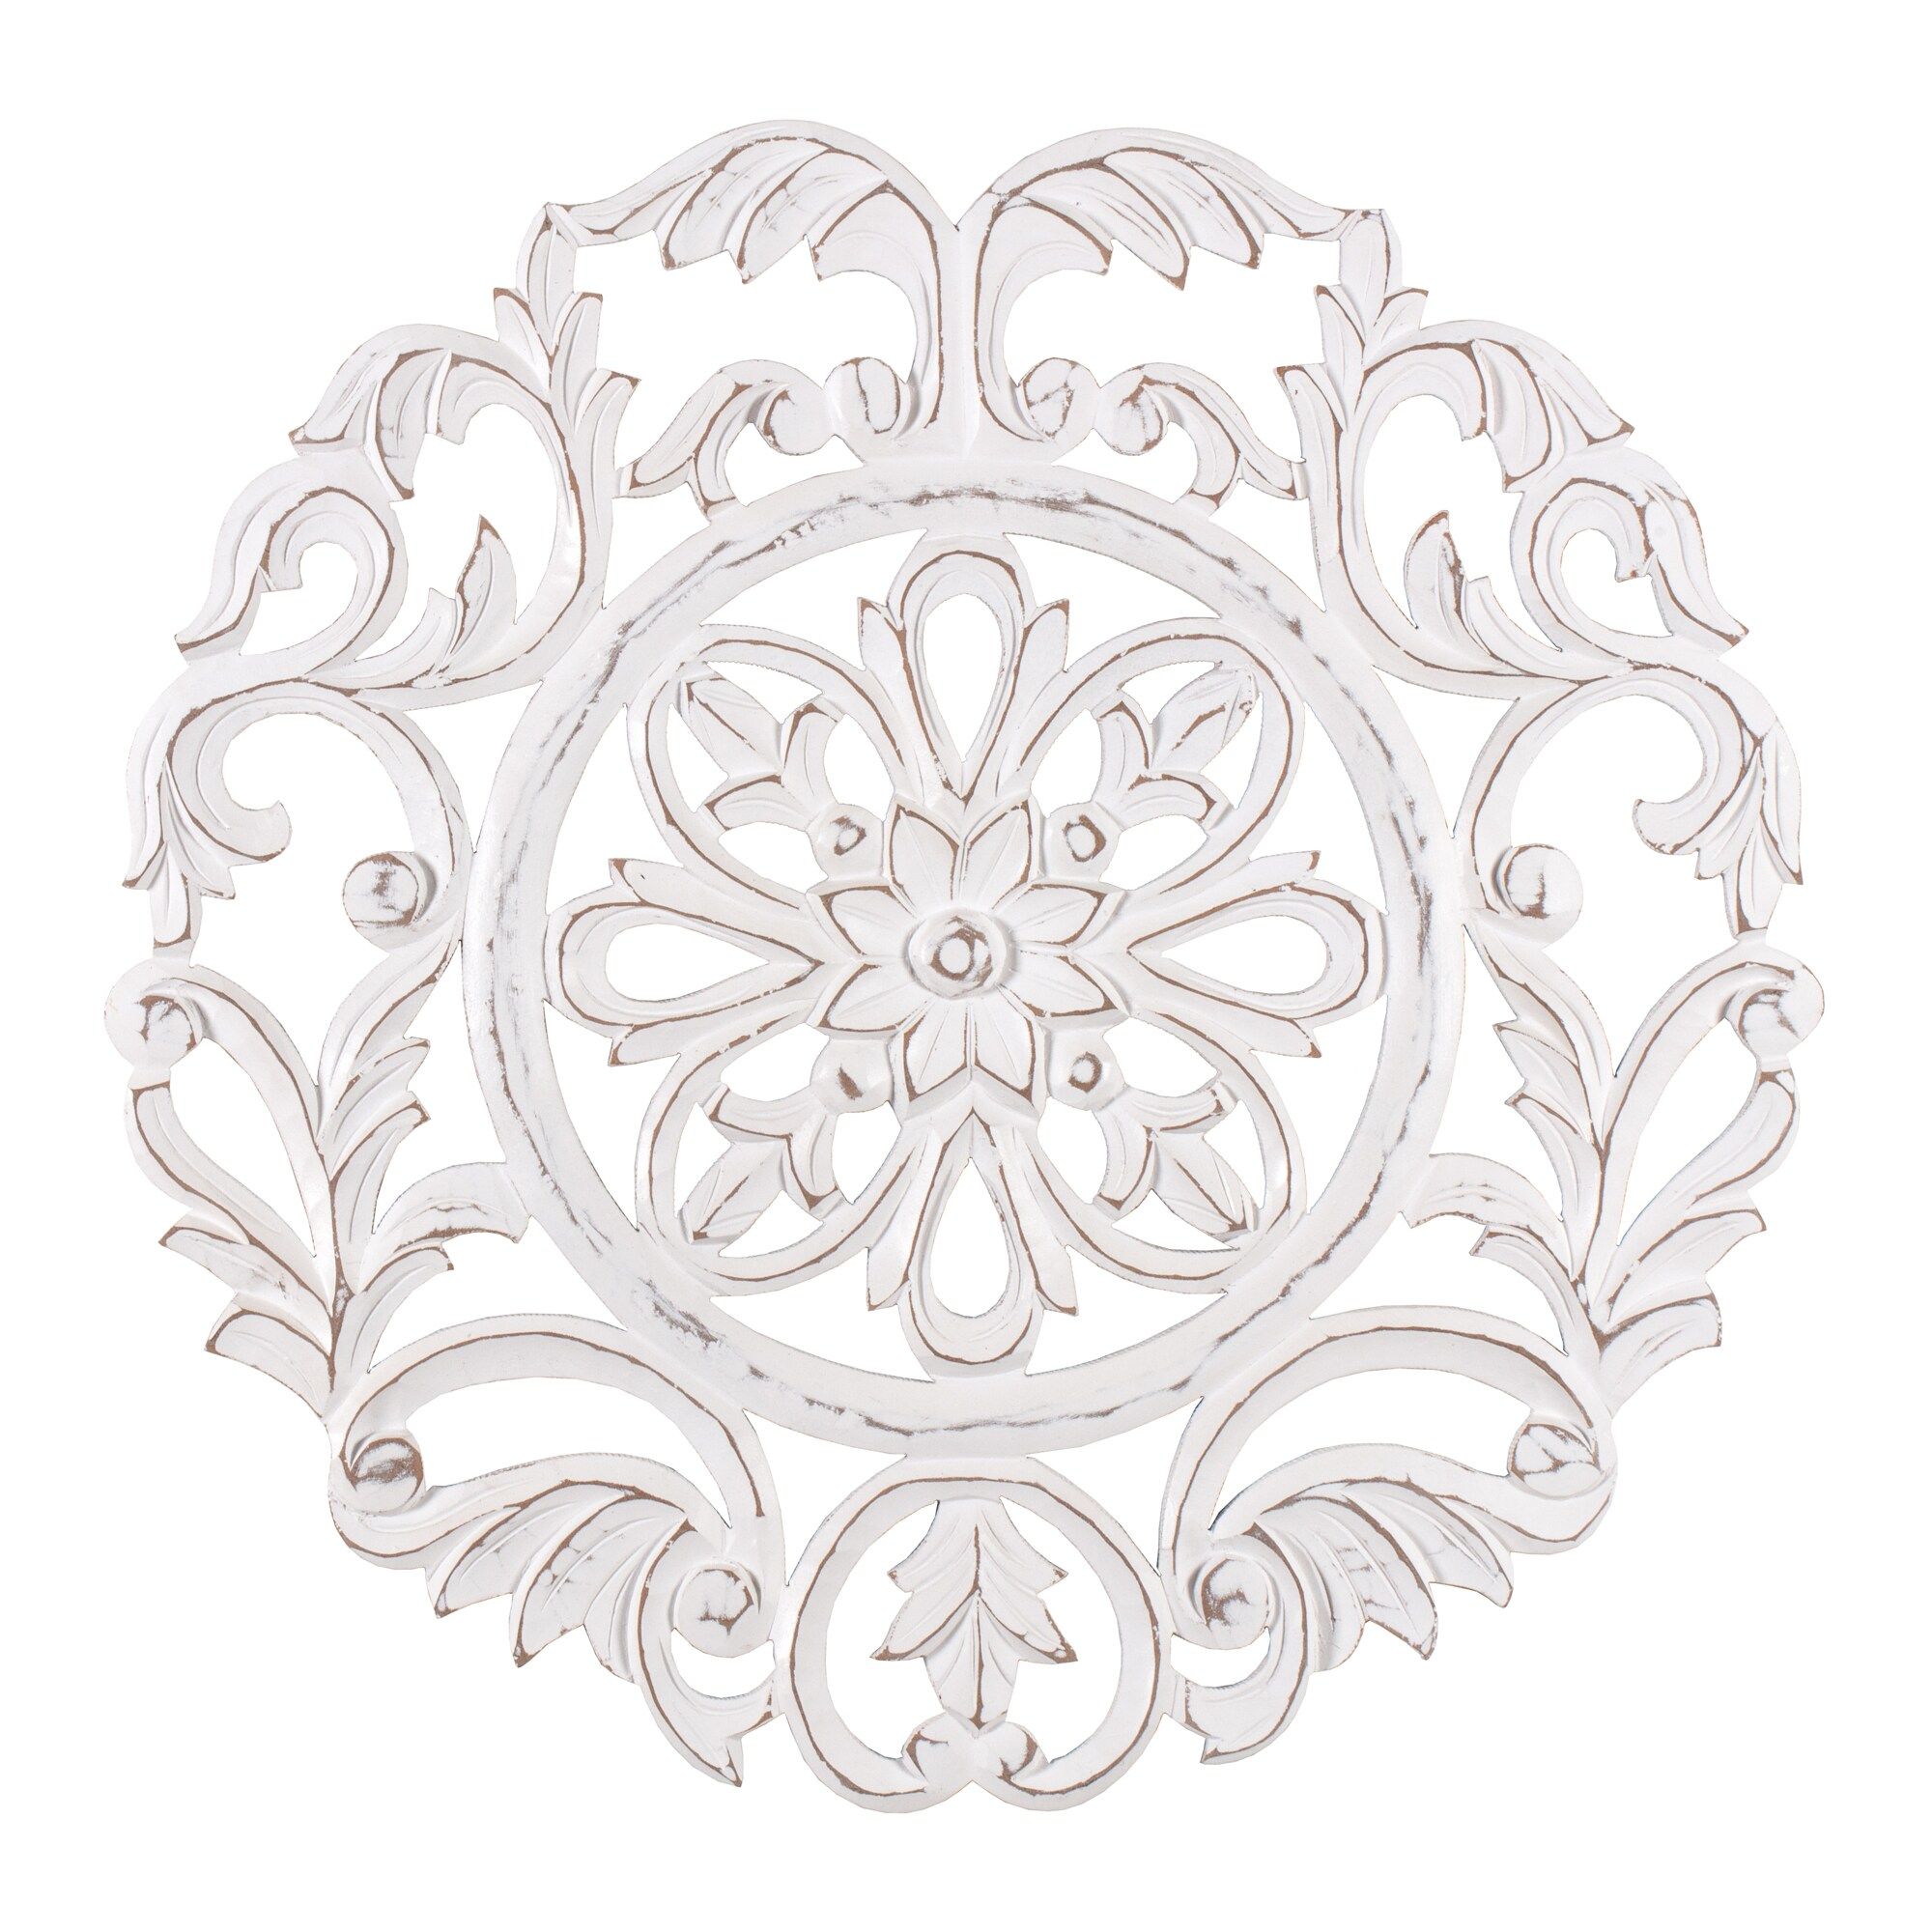 Madeleine Home Wall Medallion Wood 23.5-in H x 24-in W Vintage/Retro Wall Sculpture Lowes.com | Lowe's